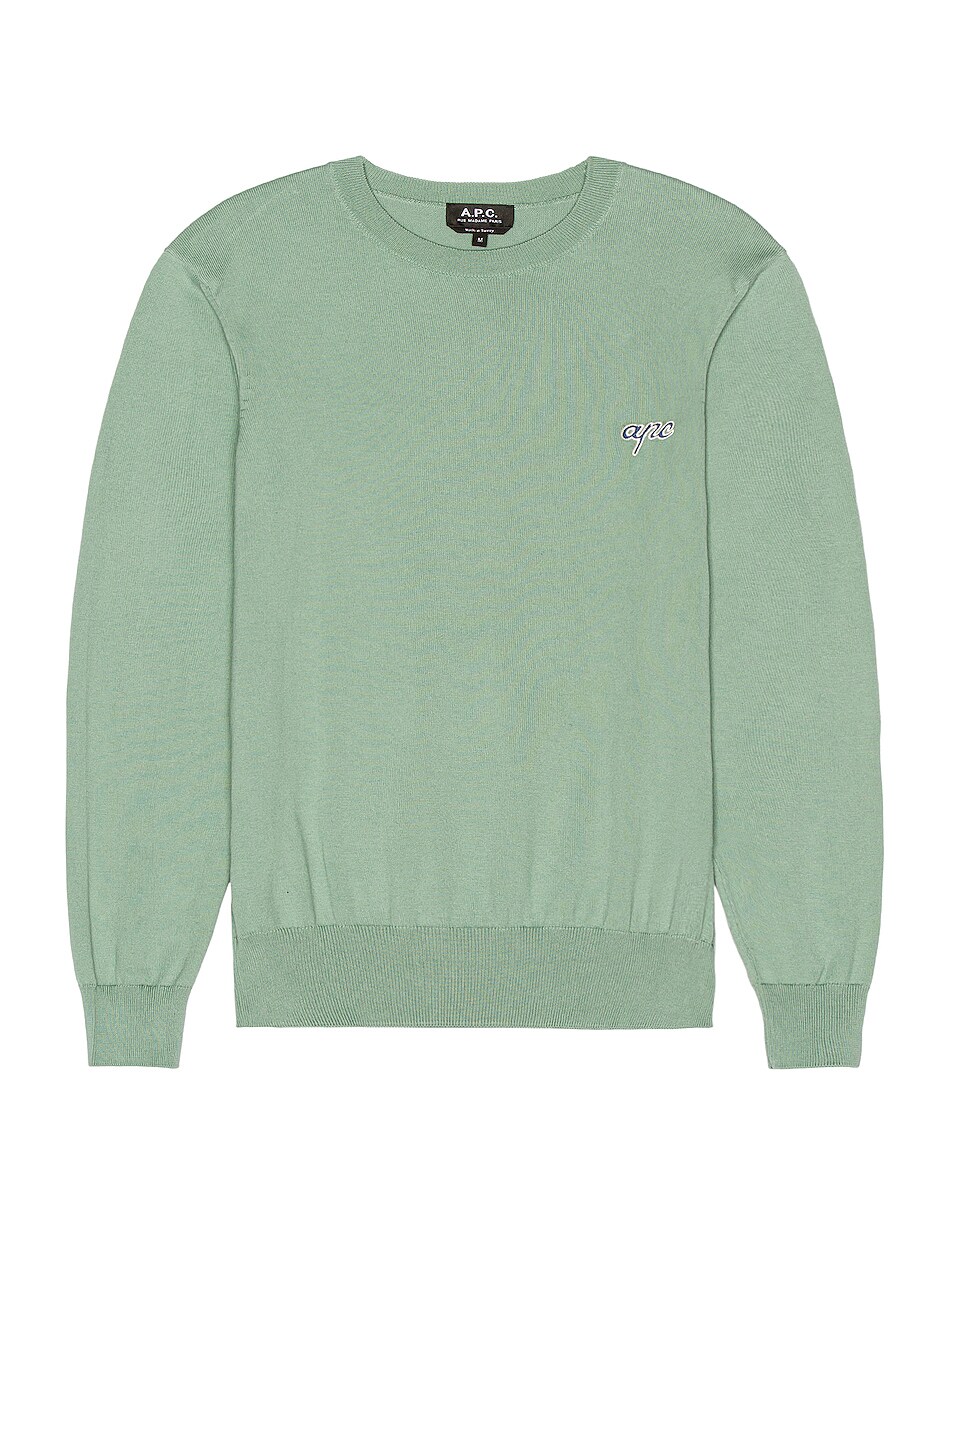 Image 1 of A.P.C. Otis Pullover in Grey Green